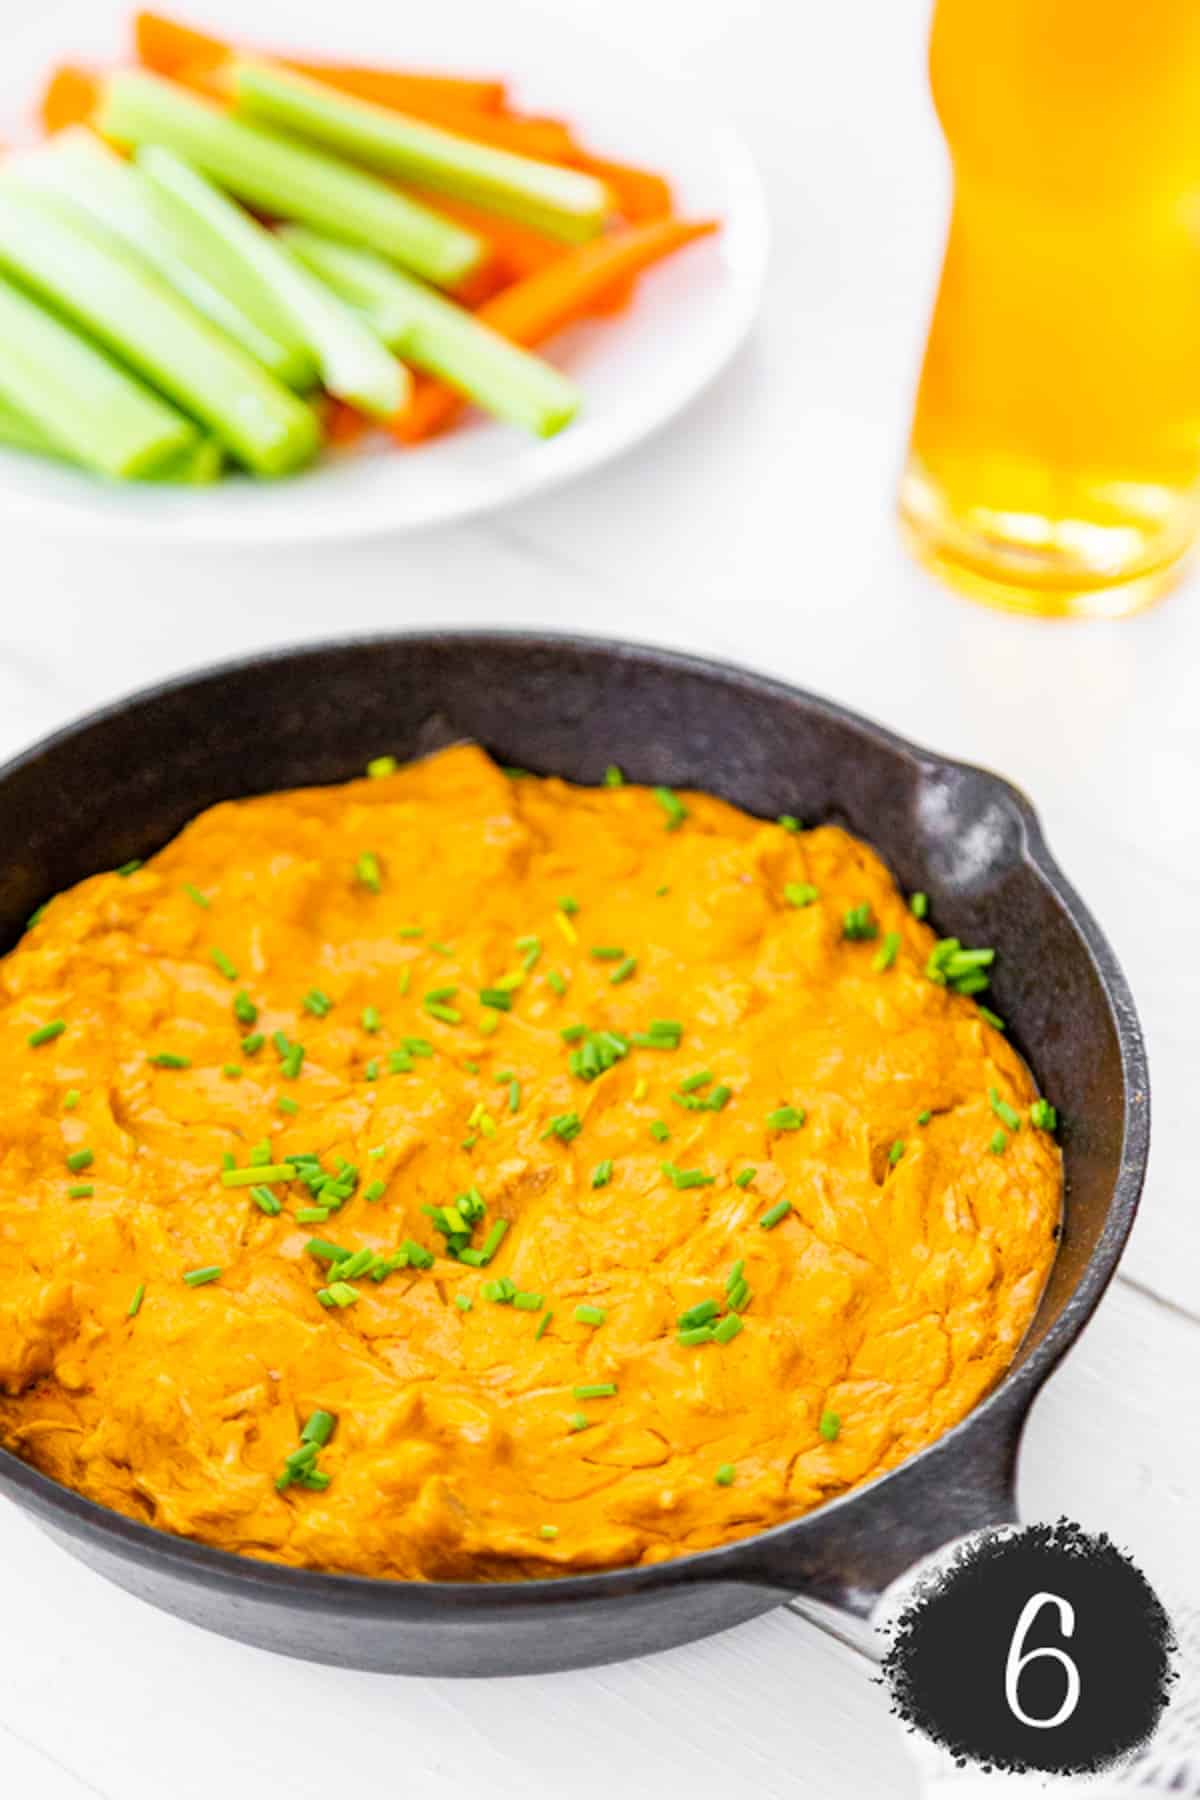 Baked buffalo chicken dip in a cast iron skillet with a white plate of celery and carrot sticks and a glass of beer next to the skillet.